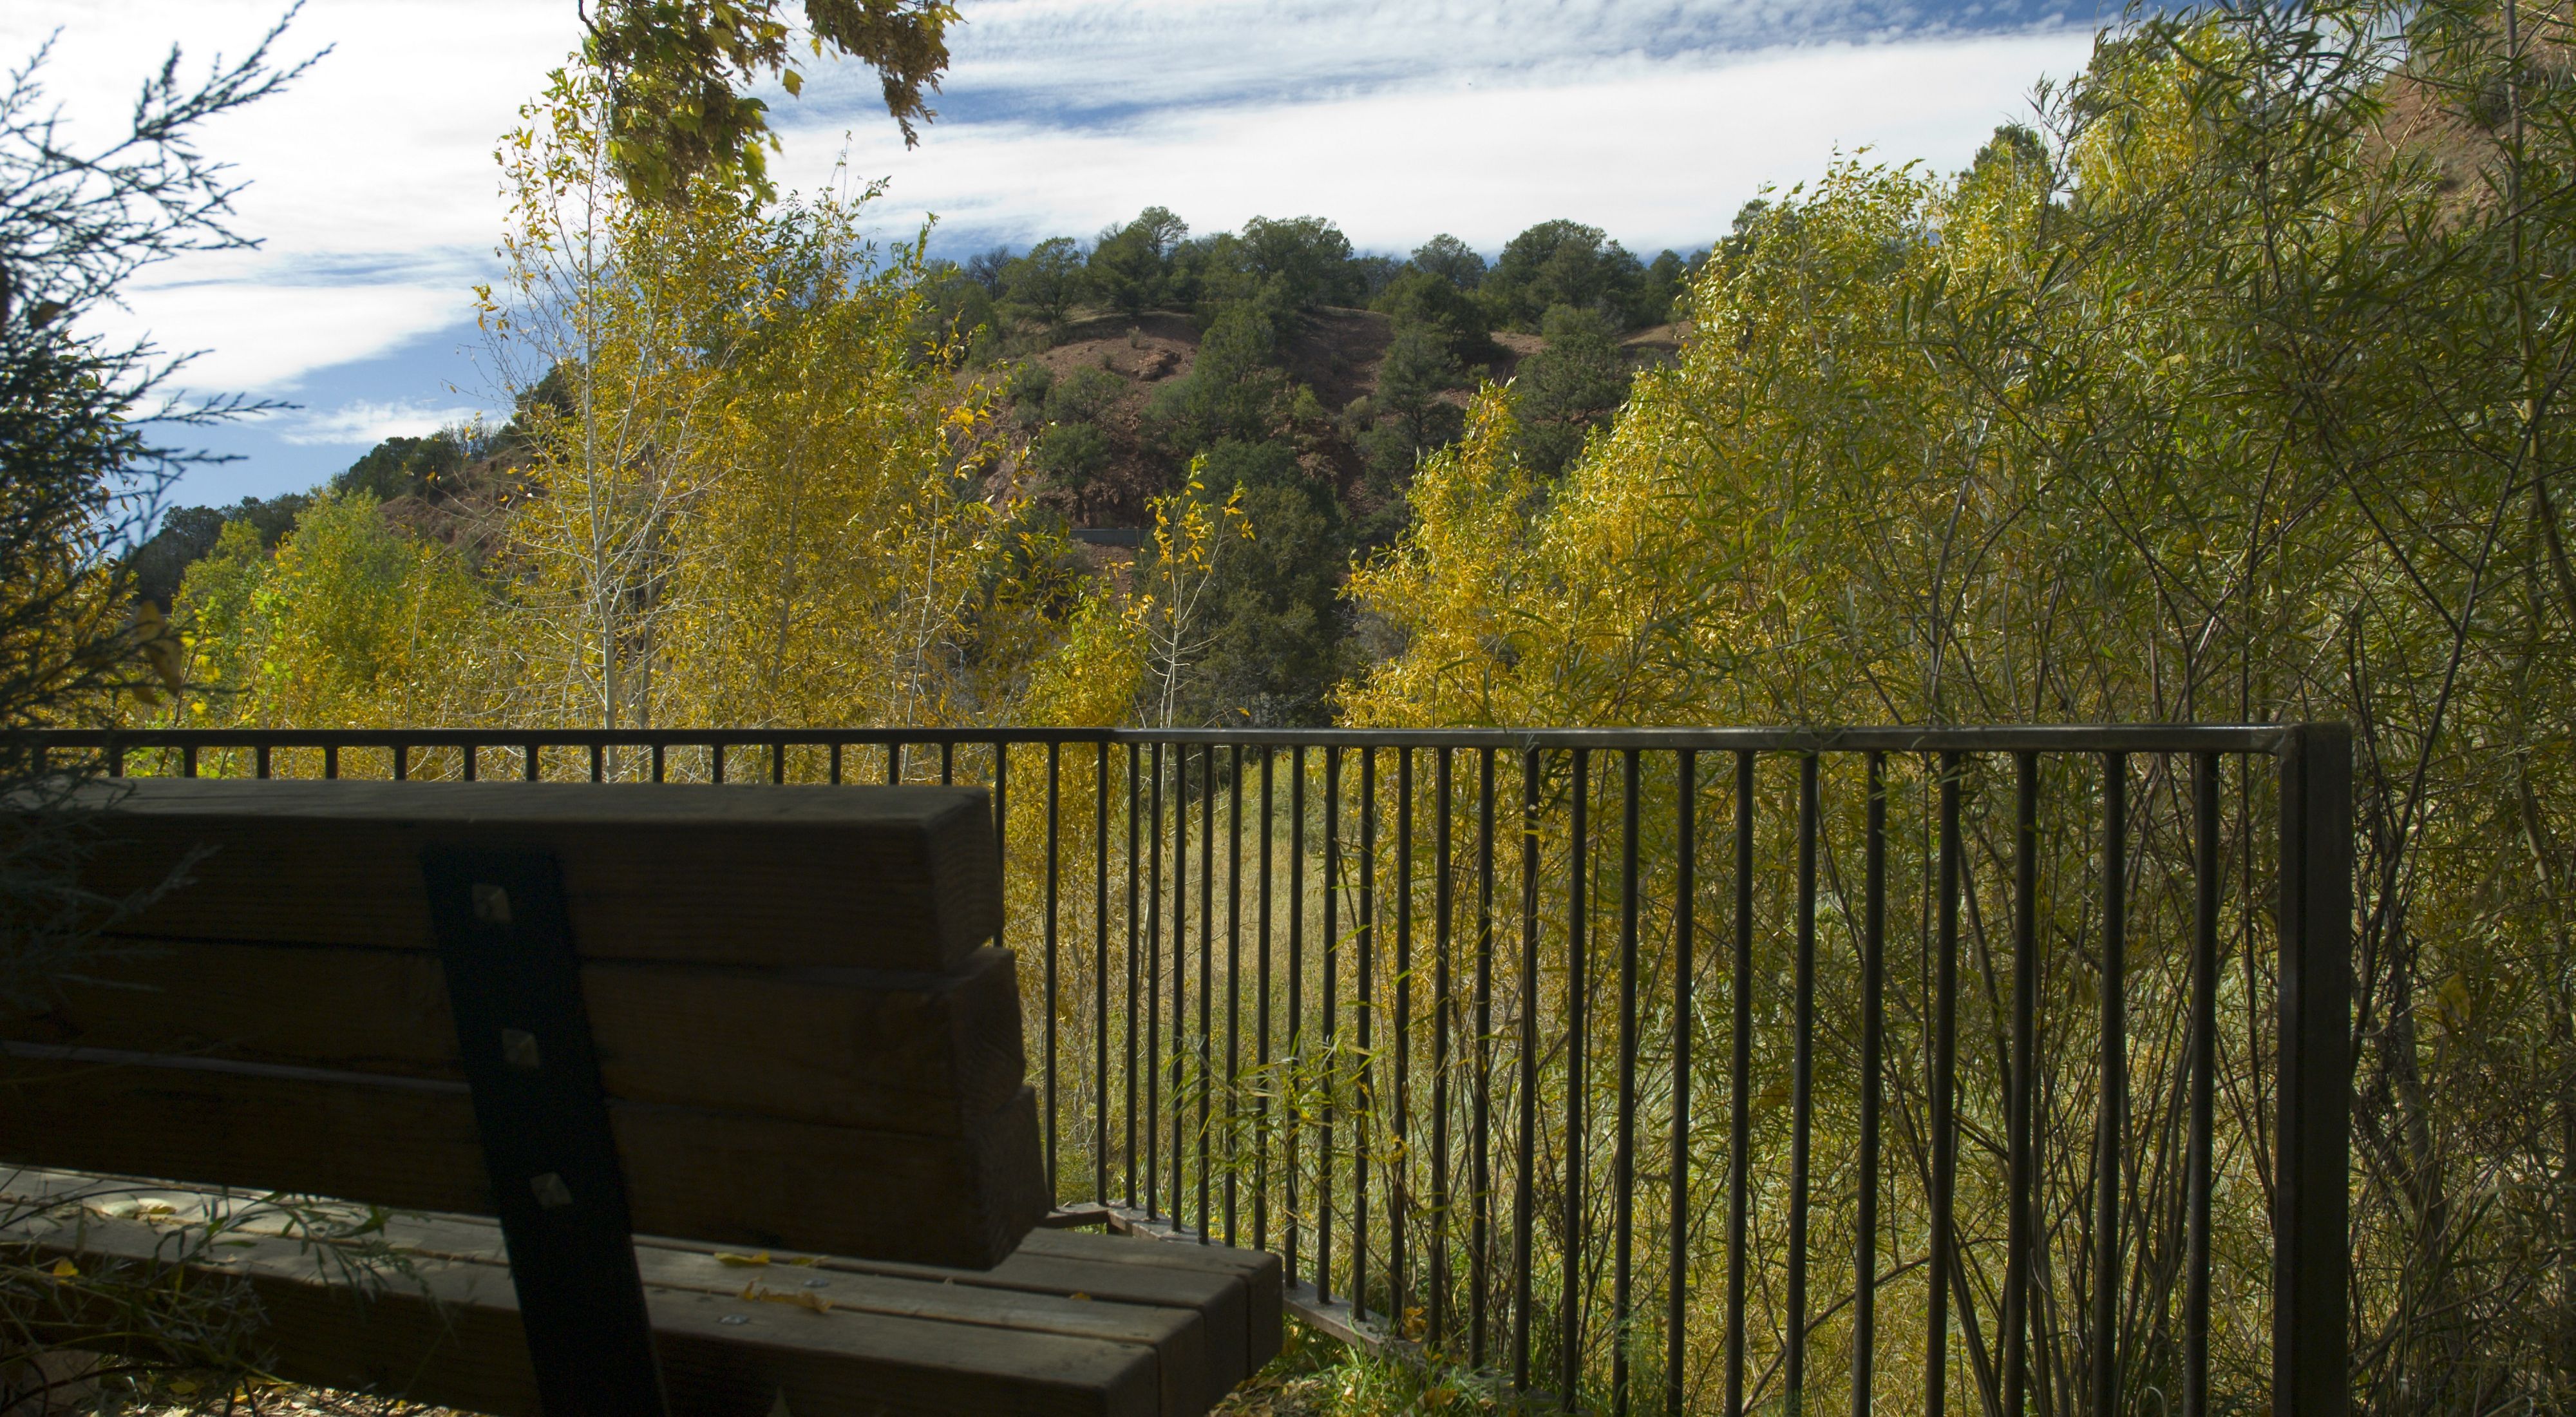 Wooden bench next to iron fence overlooking tree-lined Santa Fe Canyon Preserve.